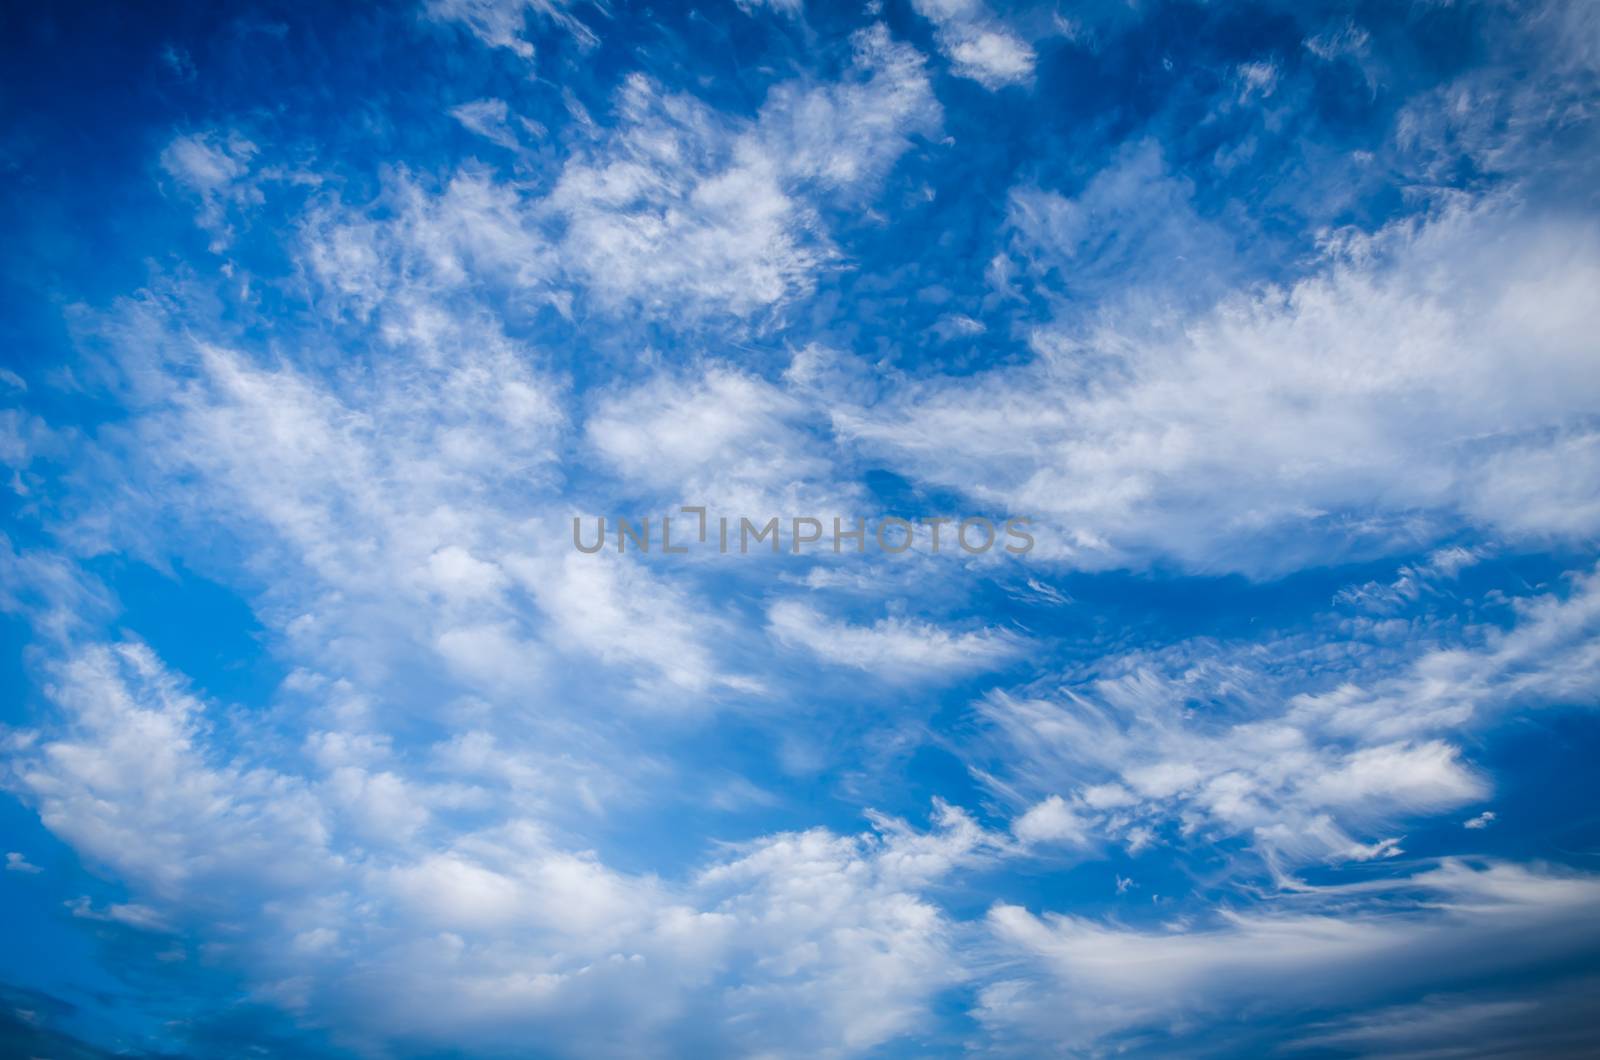 Clouds in the sky by photobyphotoboy